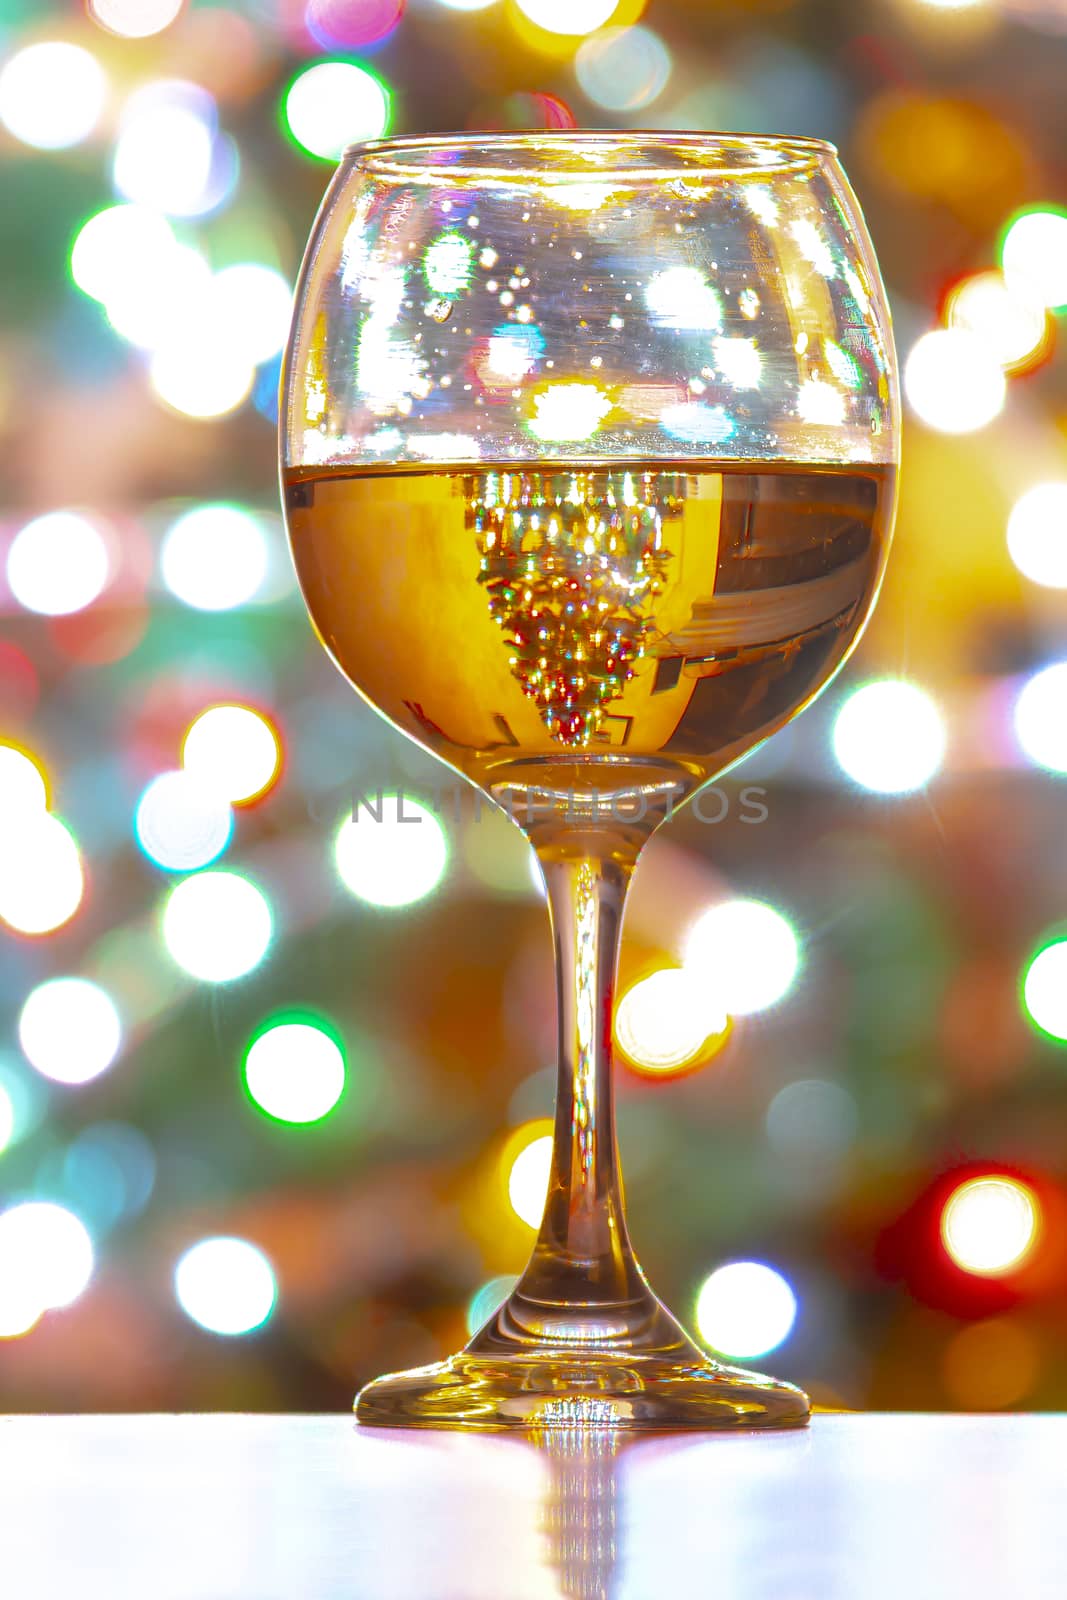 A cup of a white wine on a background of colorful lights by oasisamuel